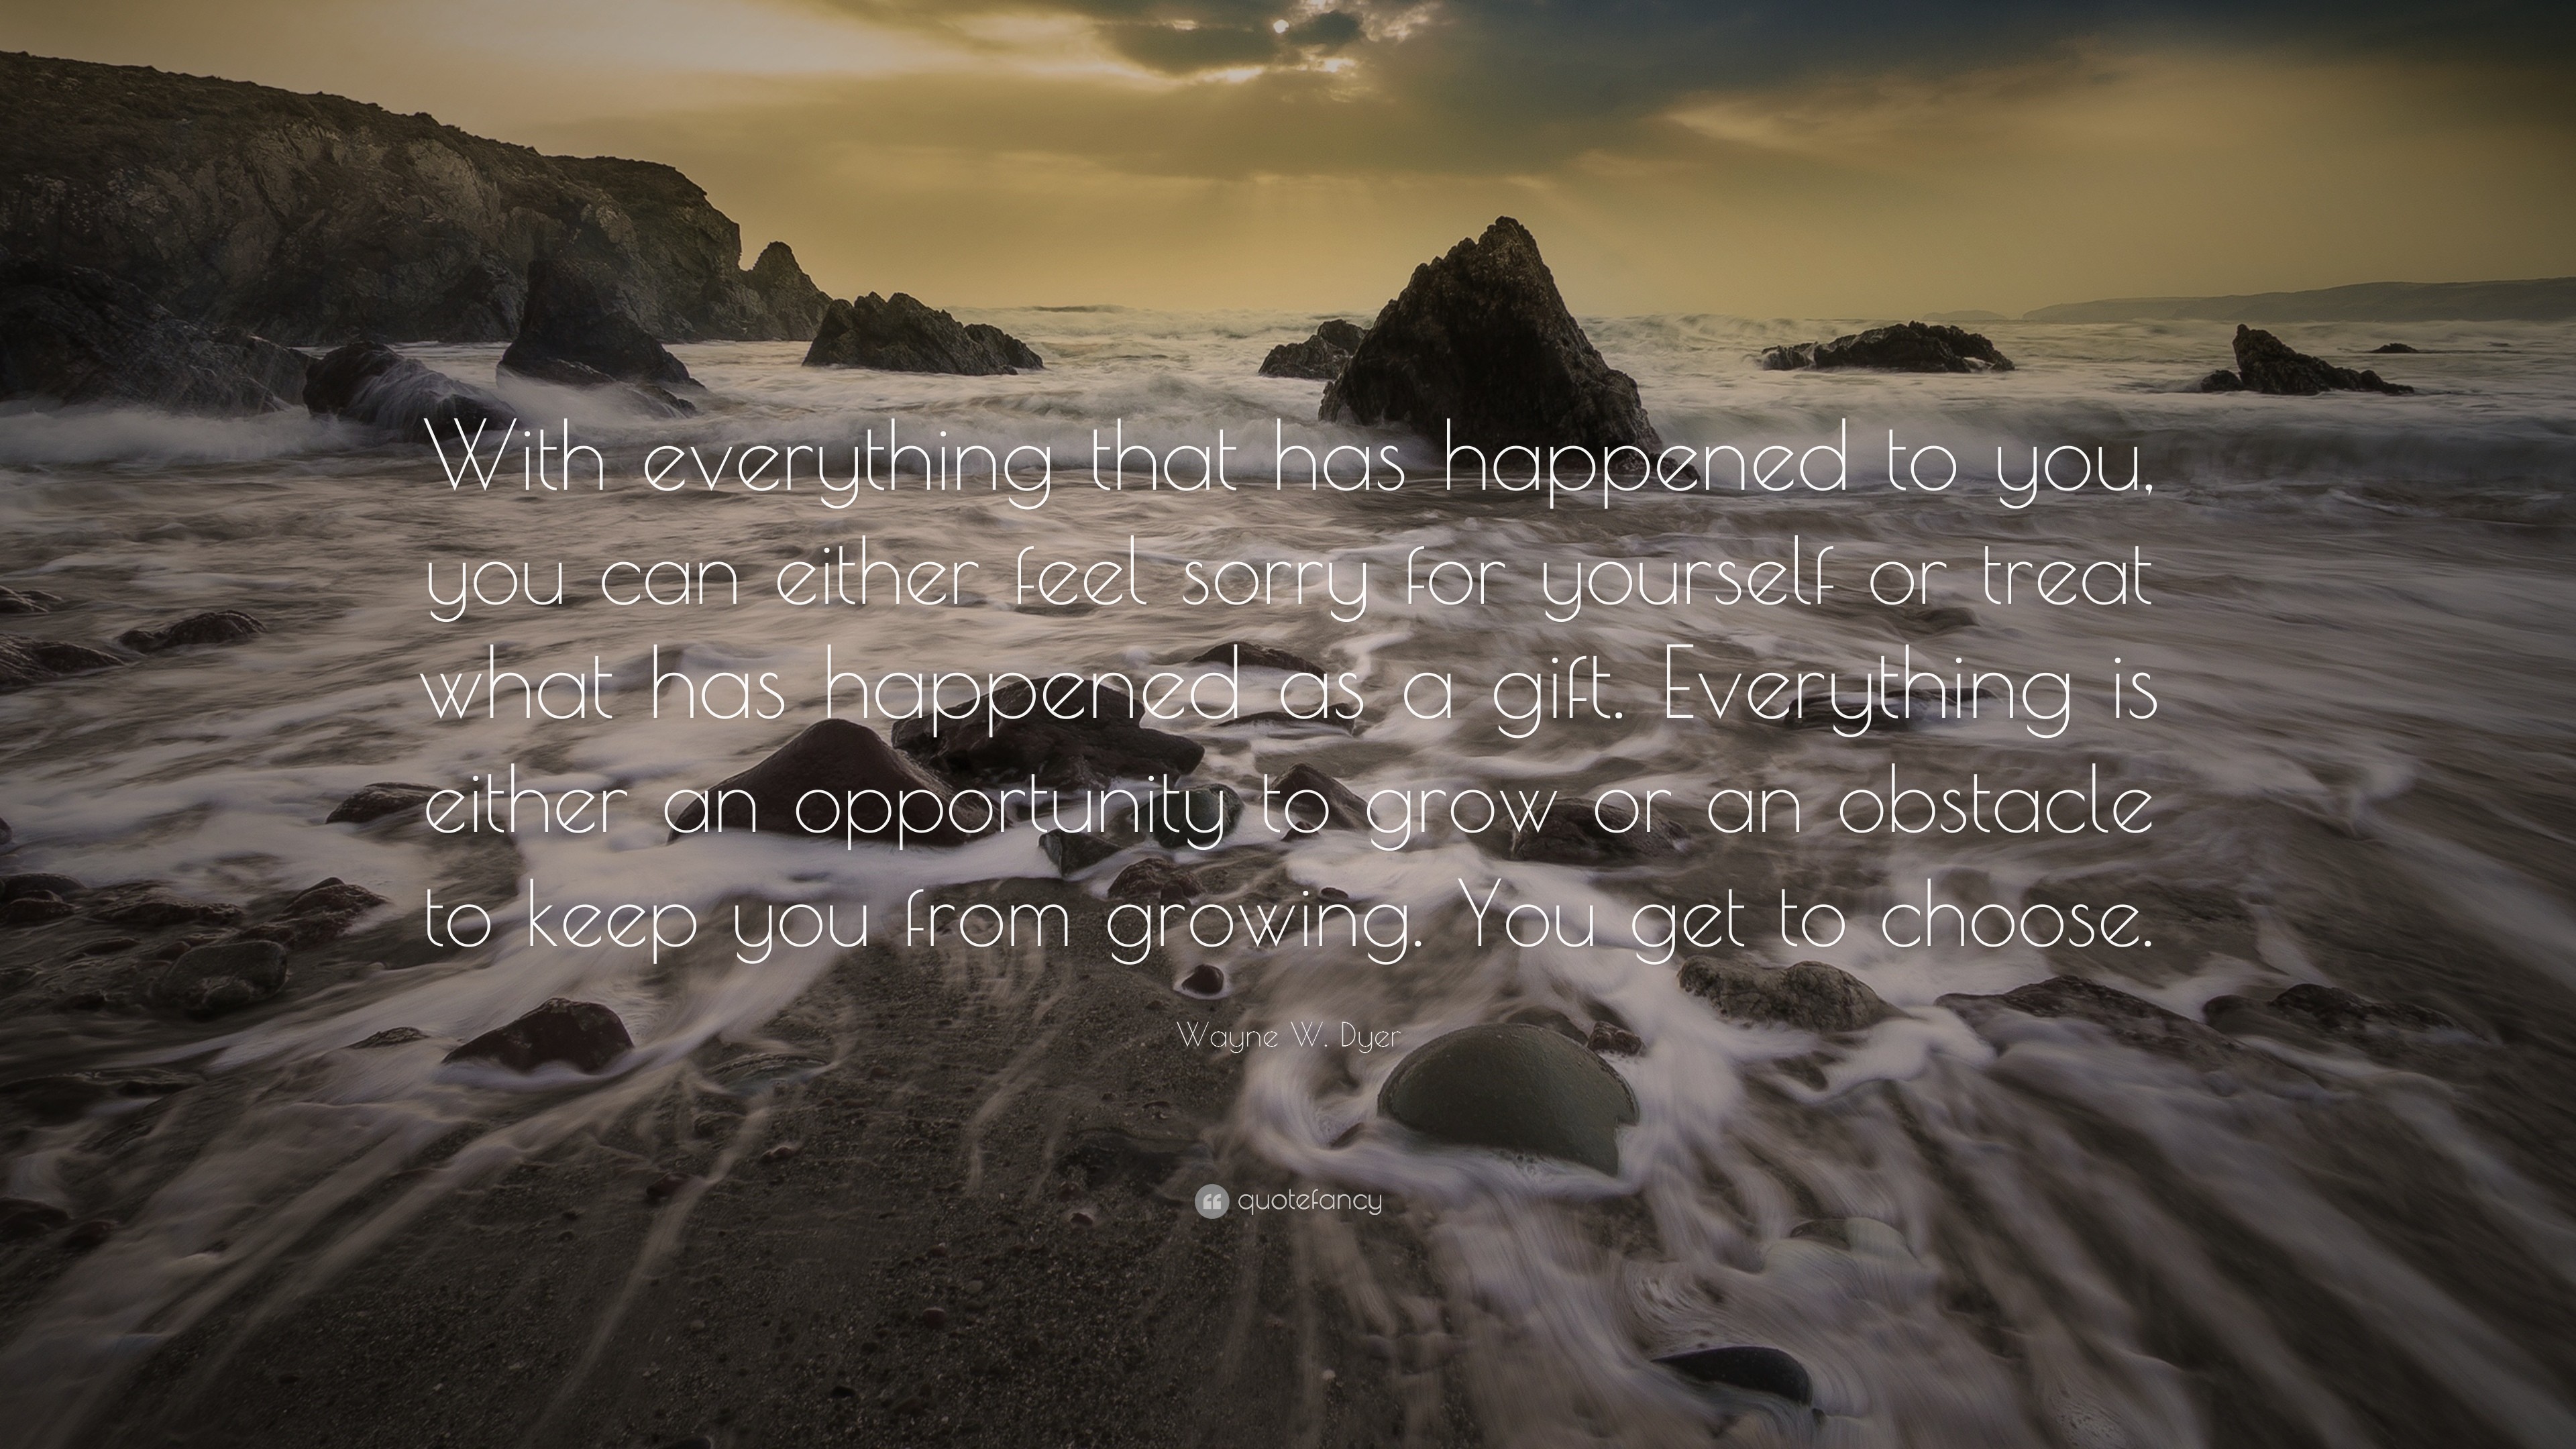 3840x2160 Positive Quotes: “With everything that has happened to you, you can either  feel